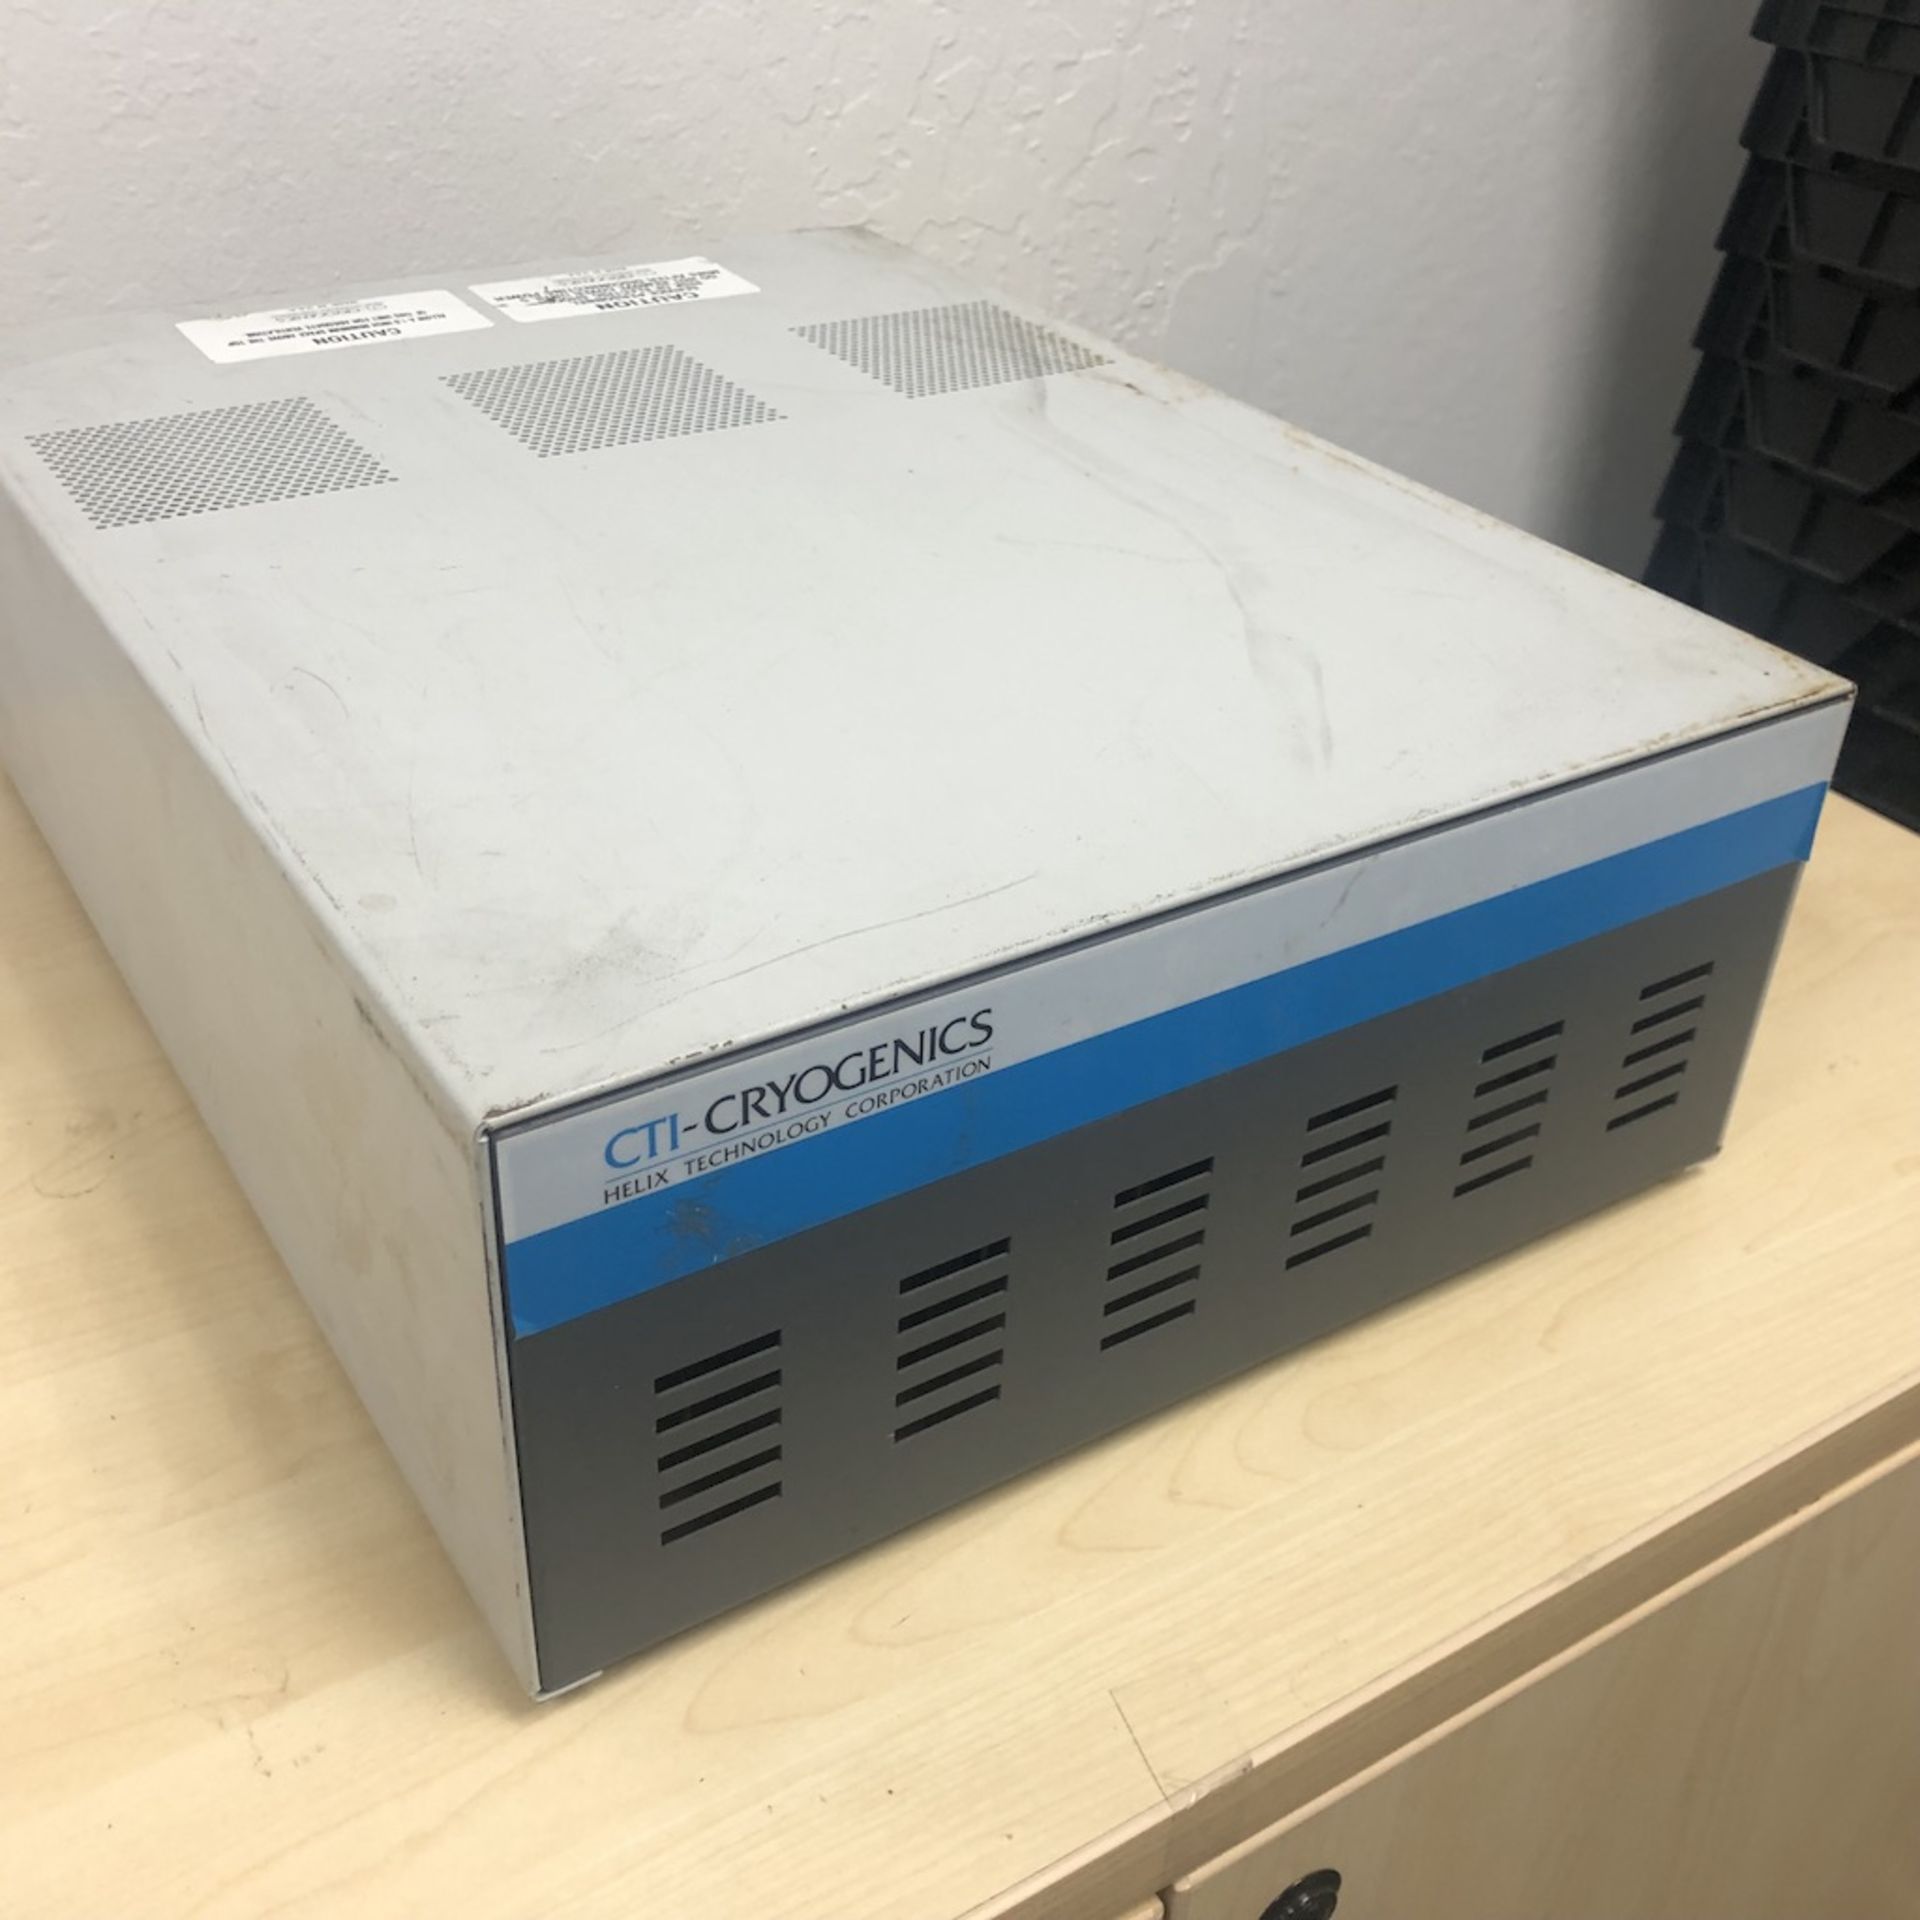 CTI CRYOGENICS HELIX TECHNOLOGY CORPORATION 8043202G002 ON-BOARD FREQUENCY CONVERTER - Image 4 of 10